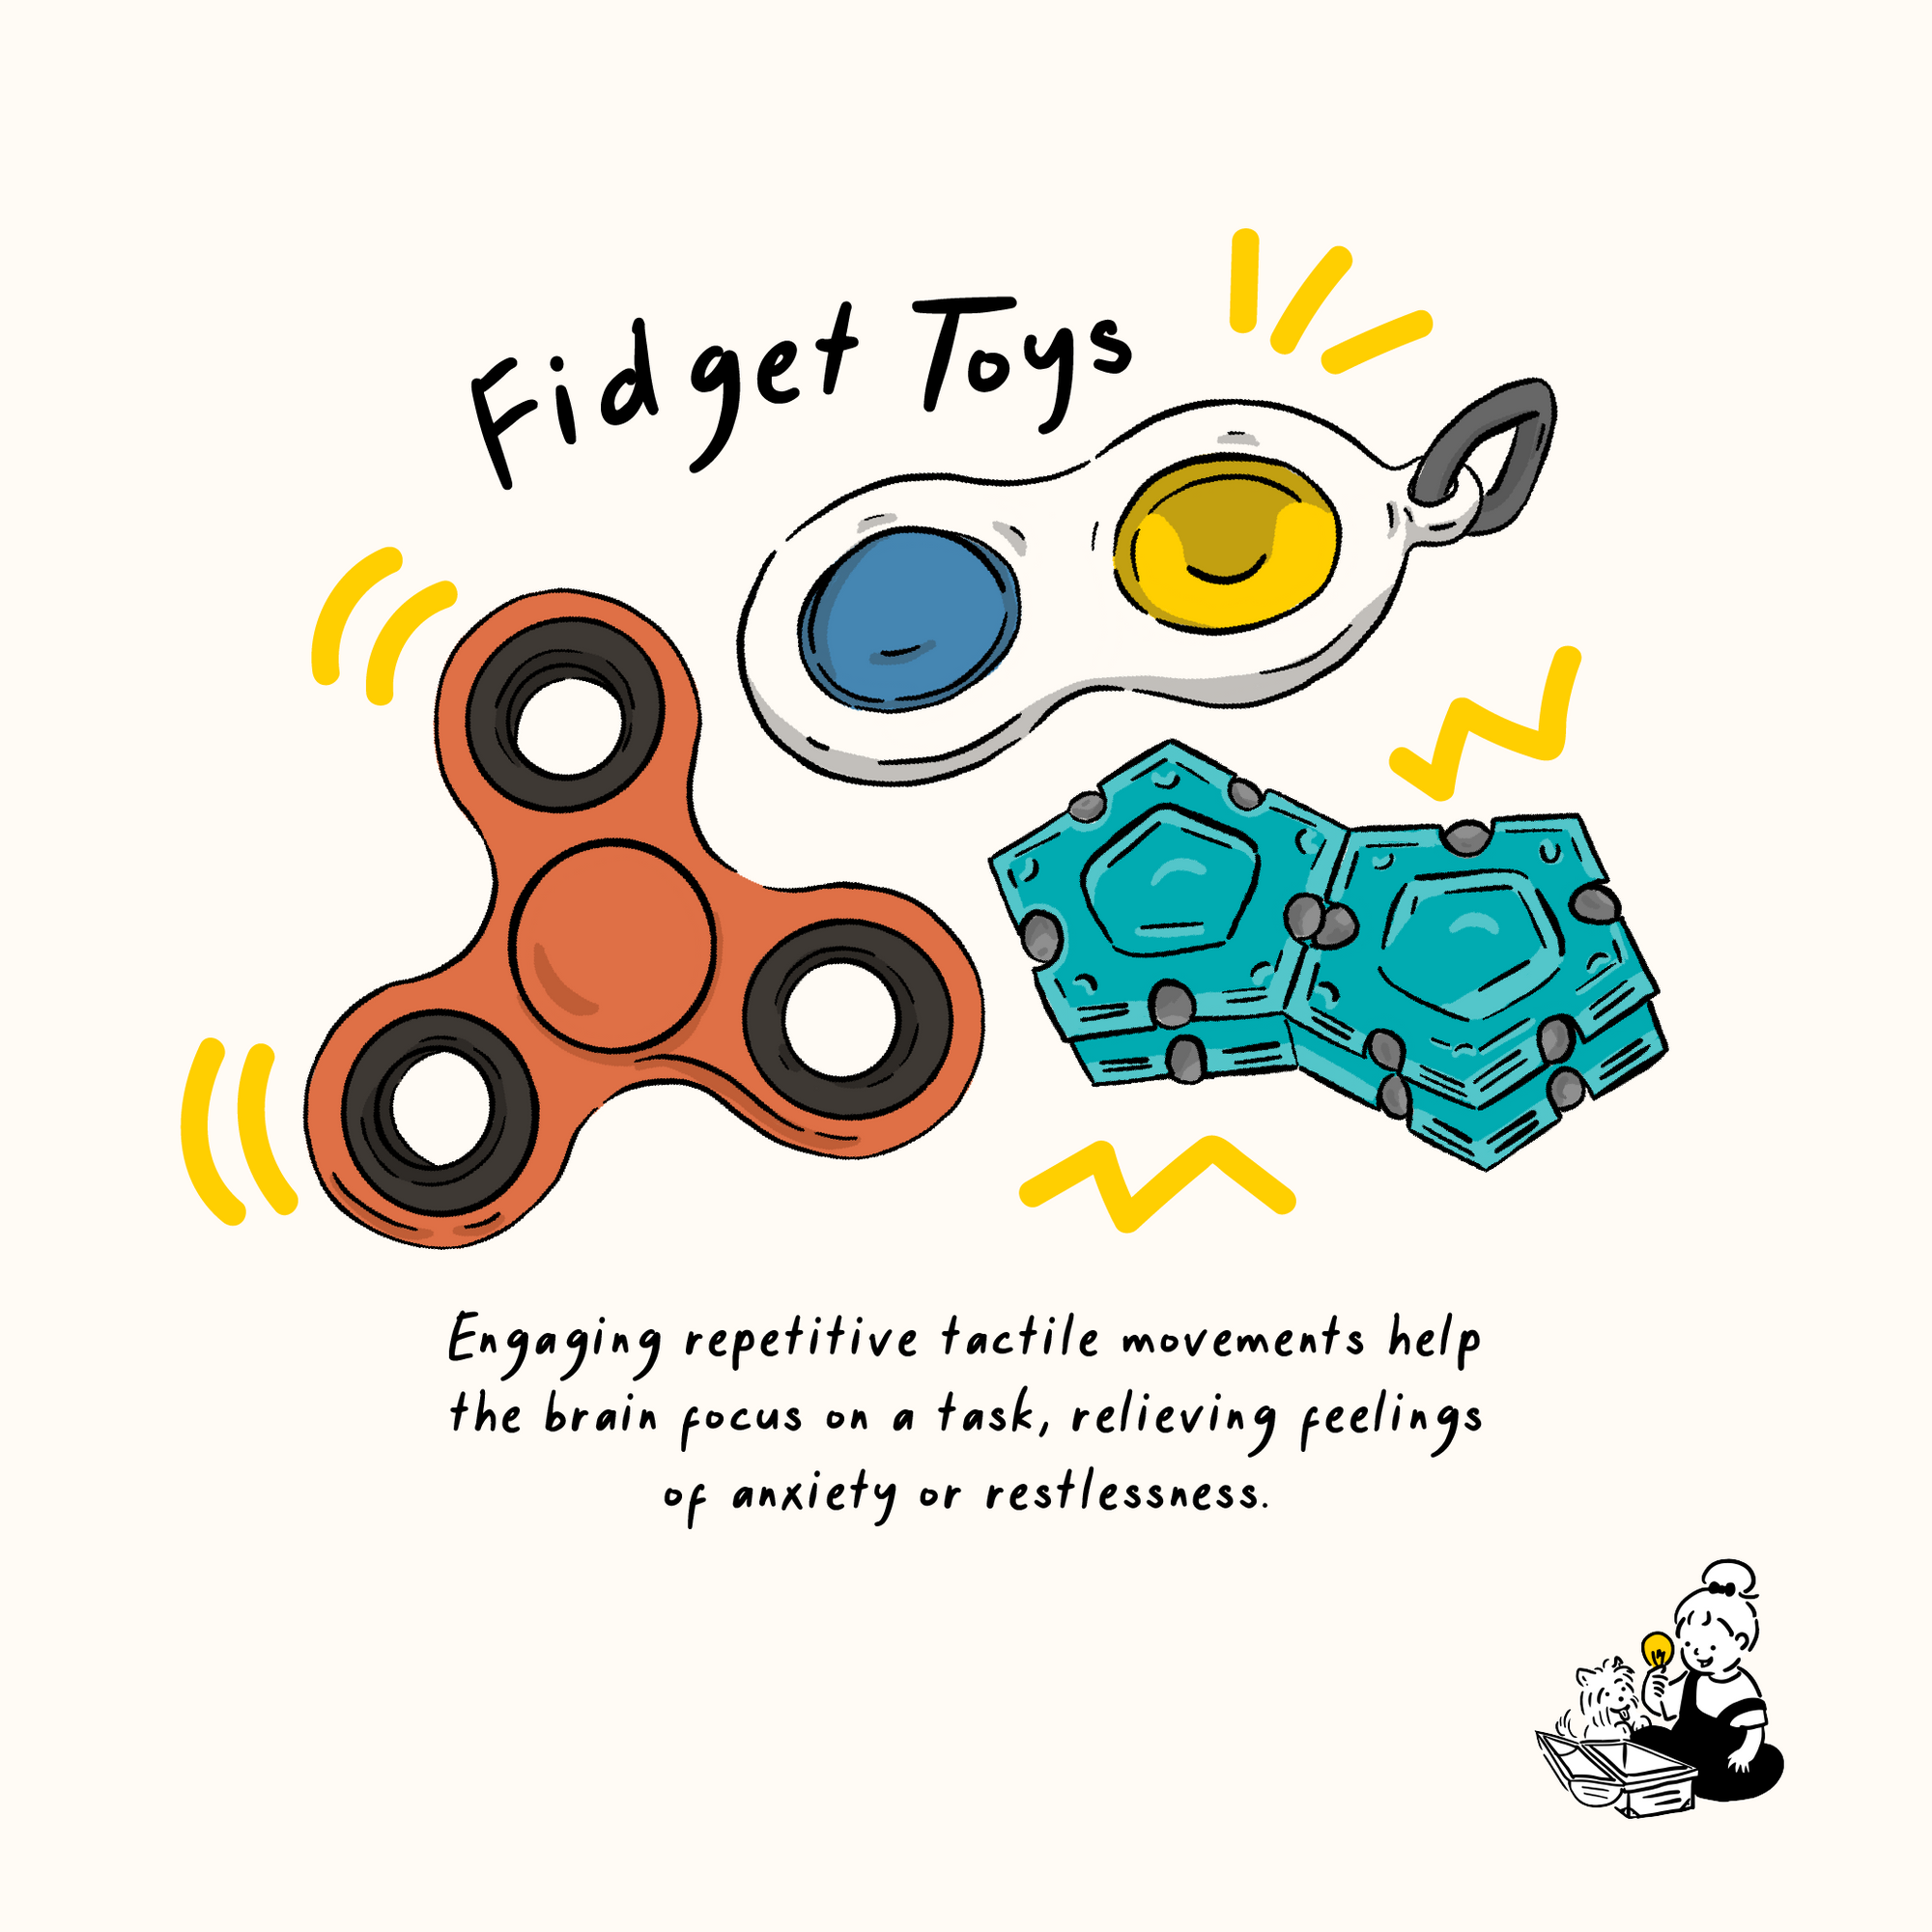 Review: We Tried 12 Best Fidget Toys That Keep You Calm & Focused (May 2022) - Singapore